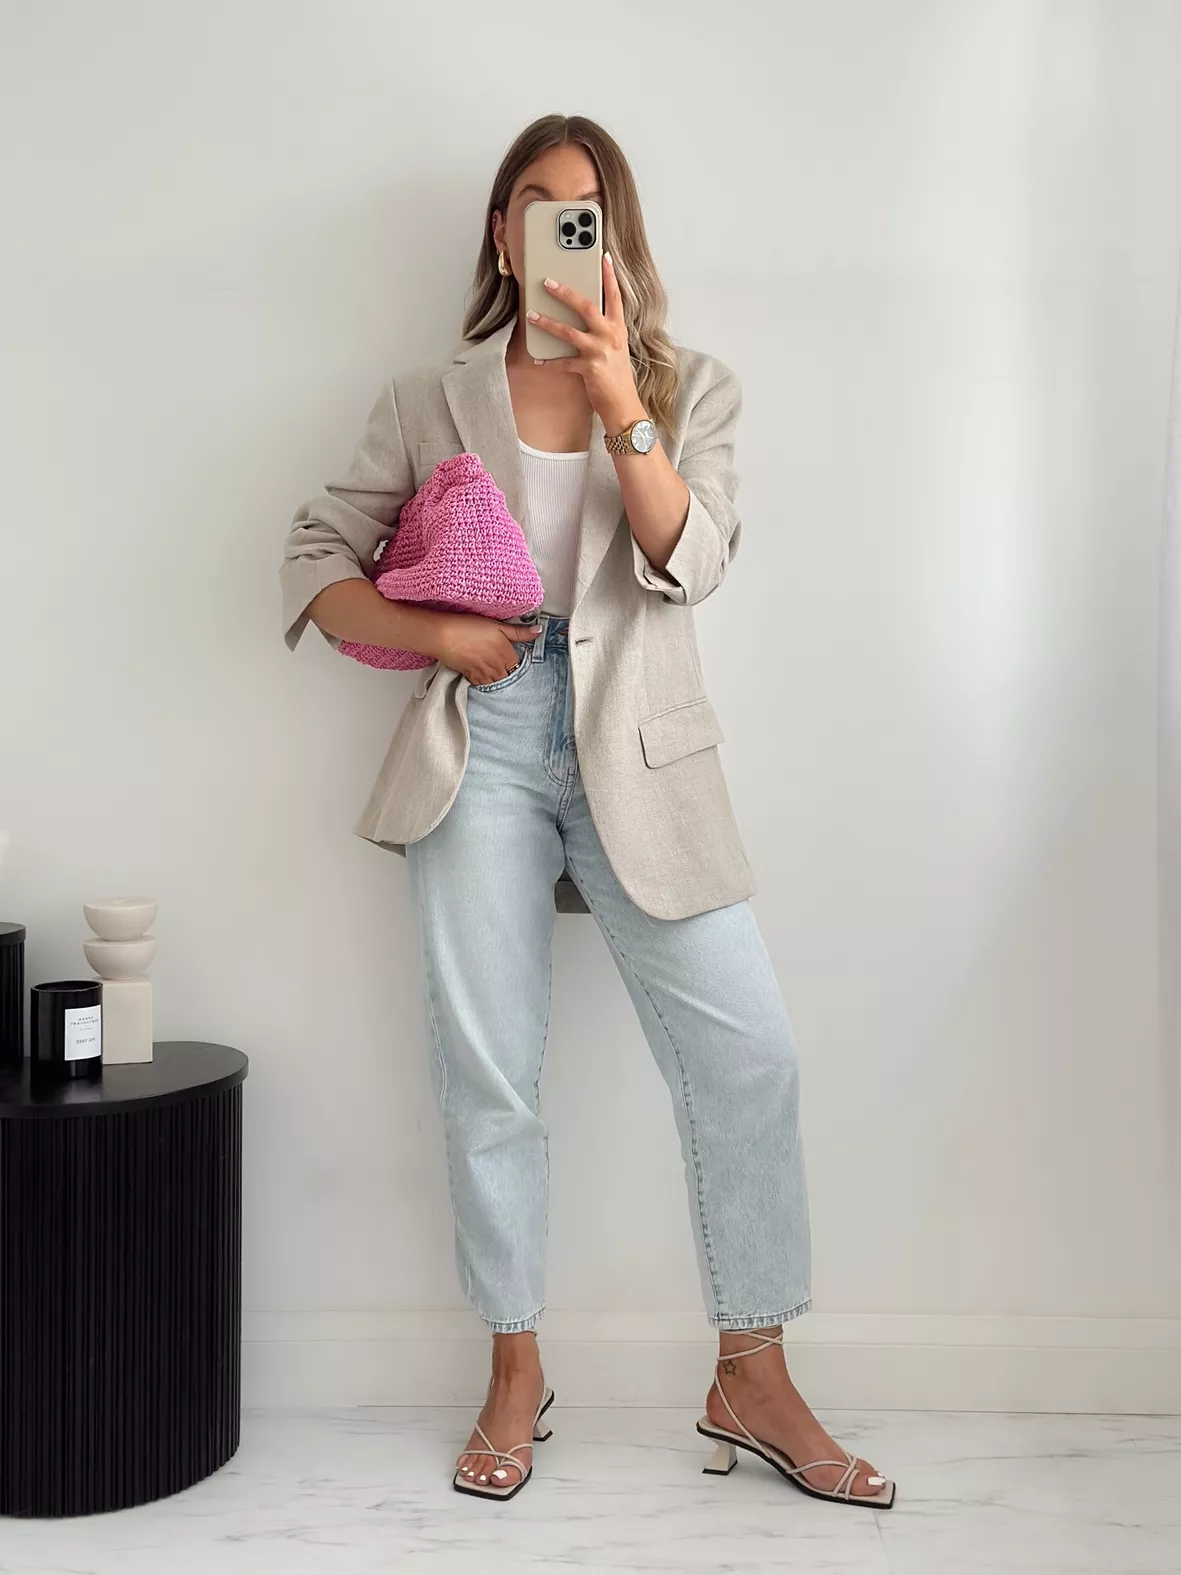 Loving this blazer moment from @missy_elz 🌿, Want the look? Download the  LTK app (link in bio!) and screenshot this post to shop inst